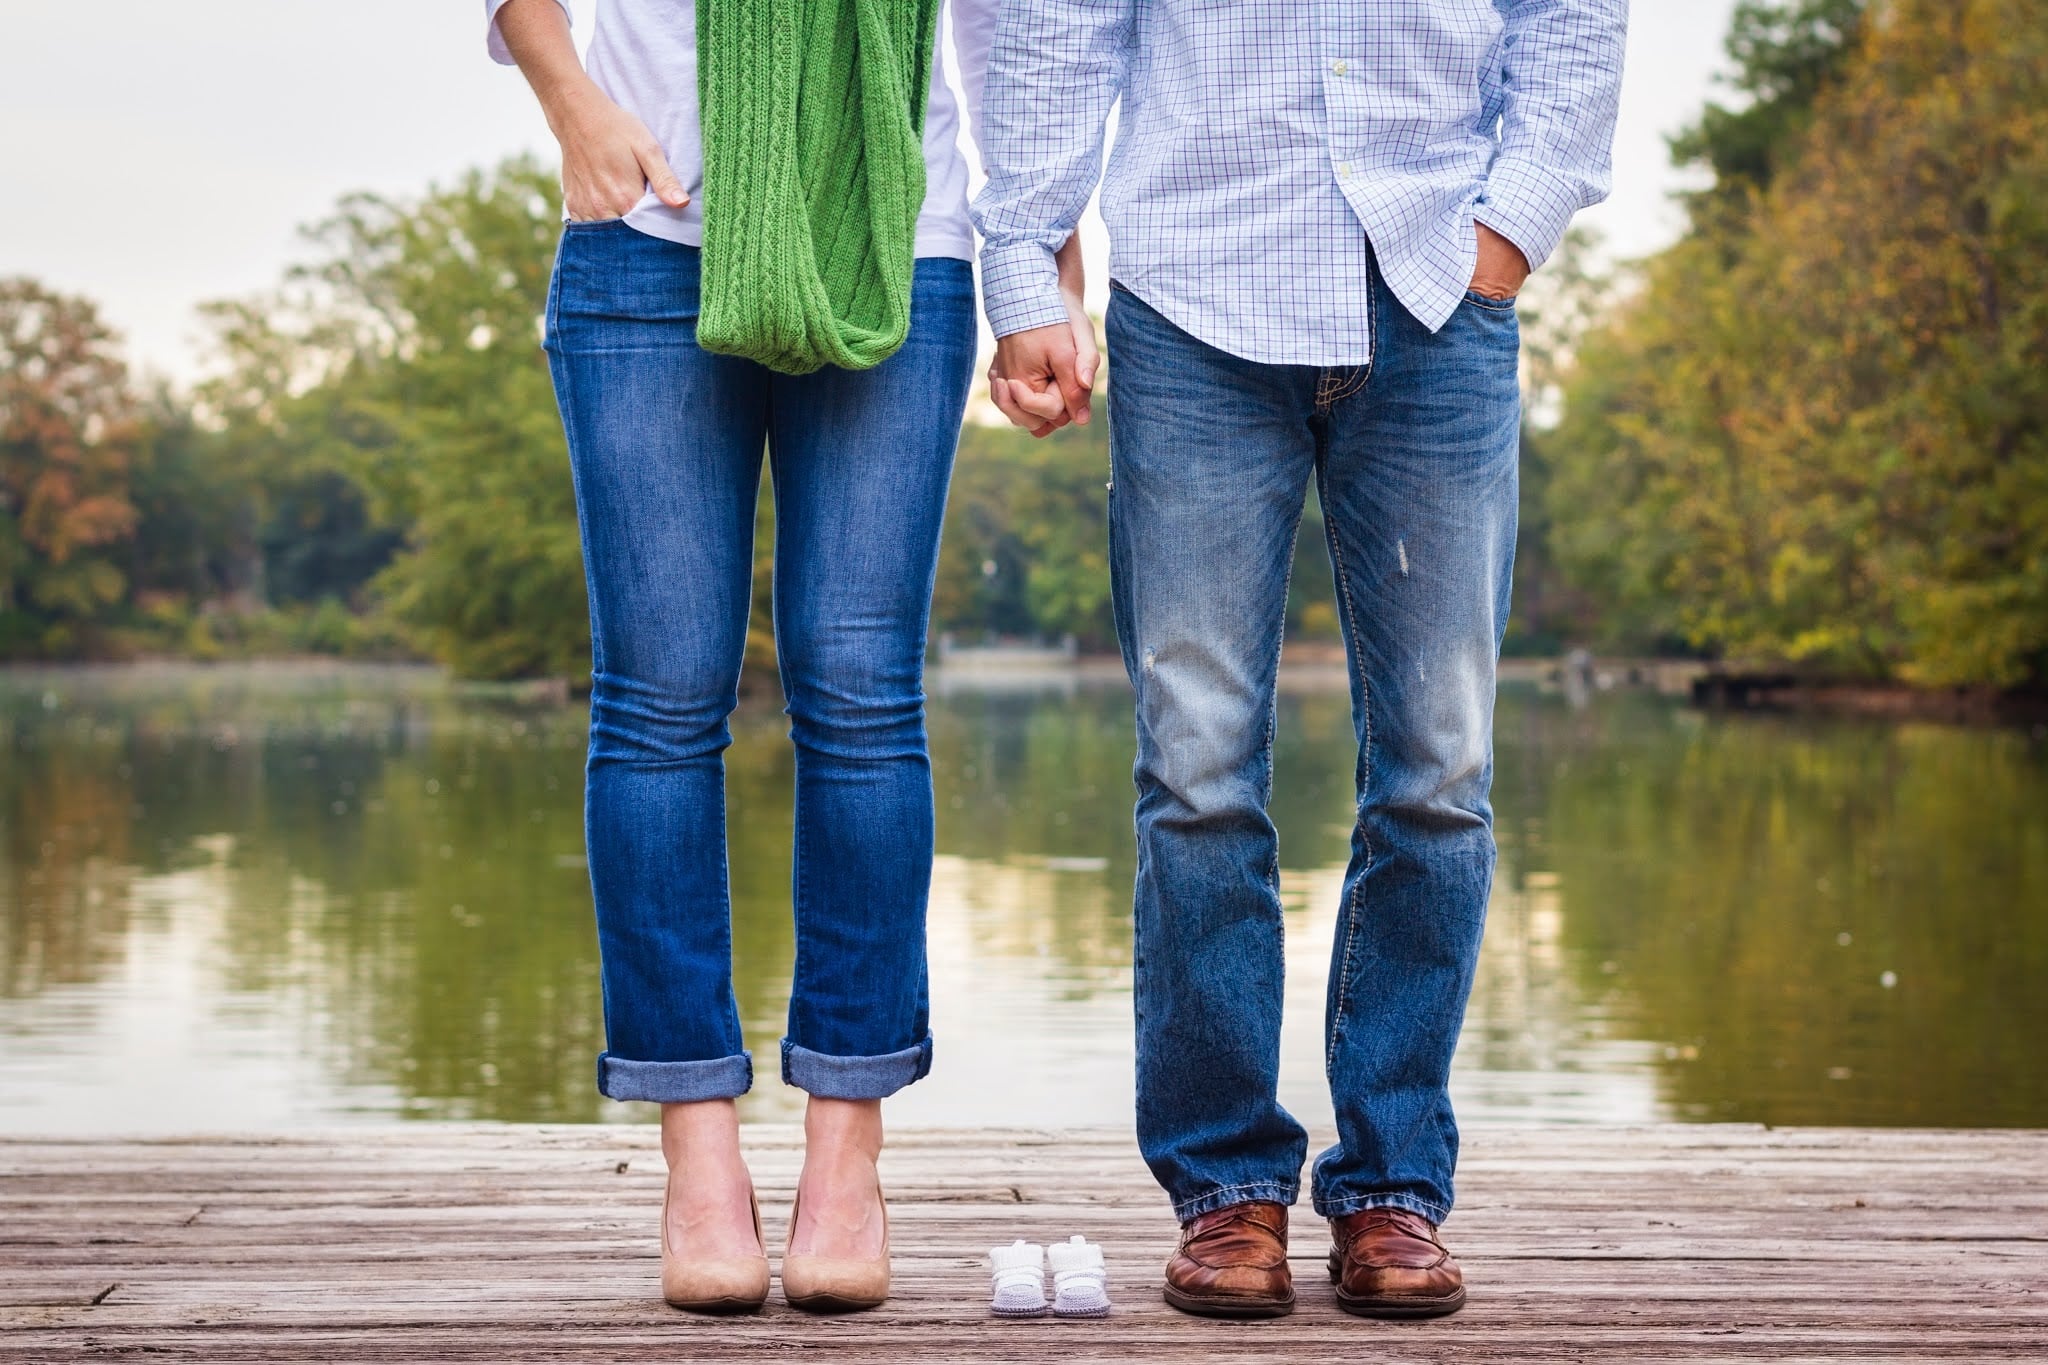 A Millennial couple holds hands while standing next to a pair of baby shoes